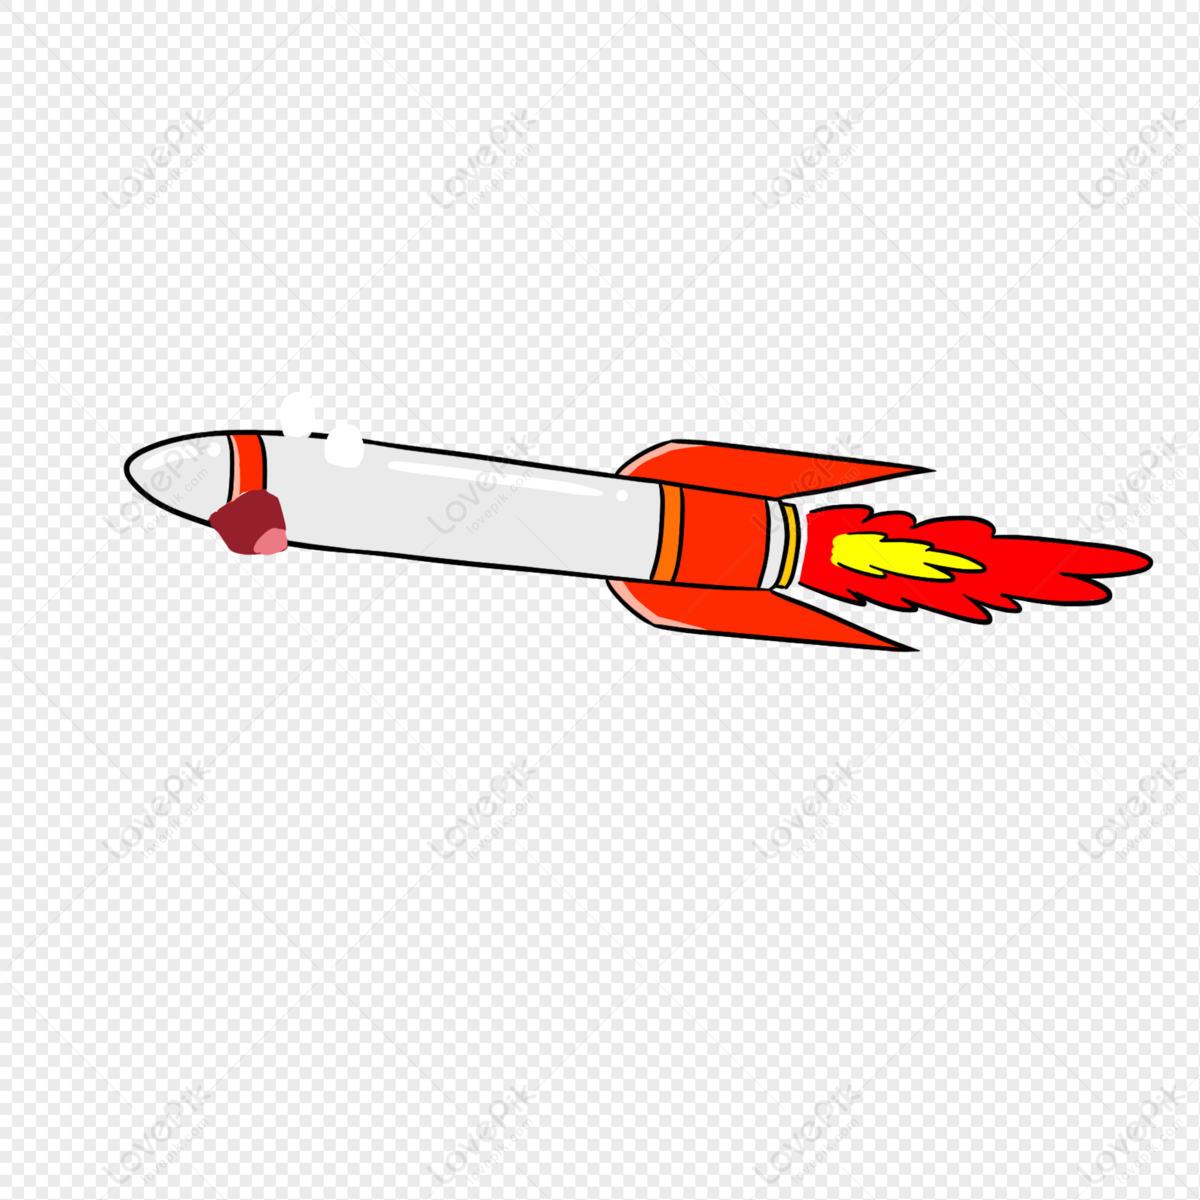 One Missile Free PNG And Clipart Image For Free Download - Lovepik |  401482289